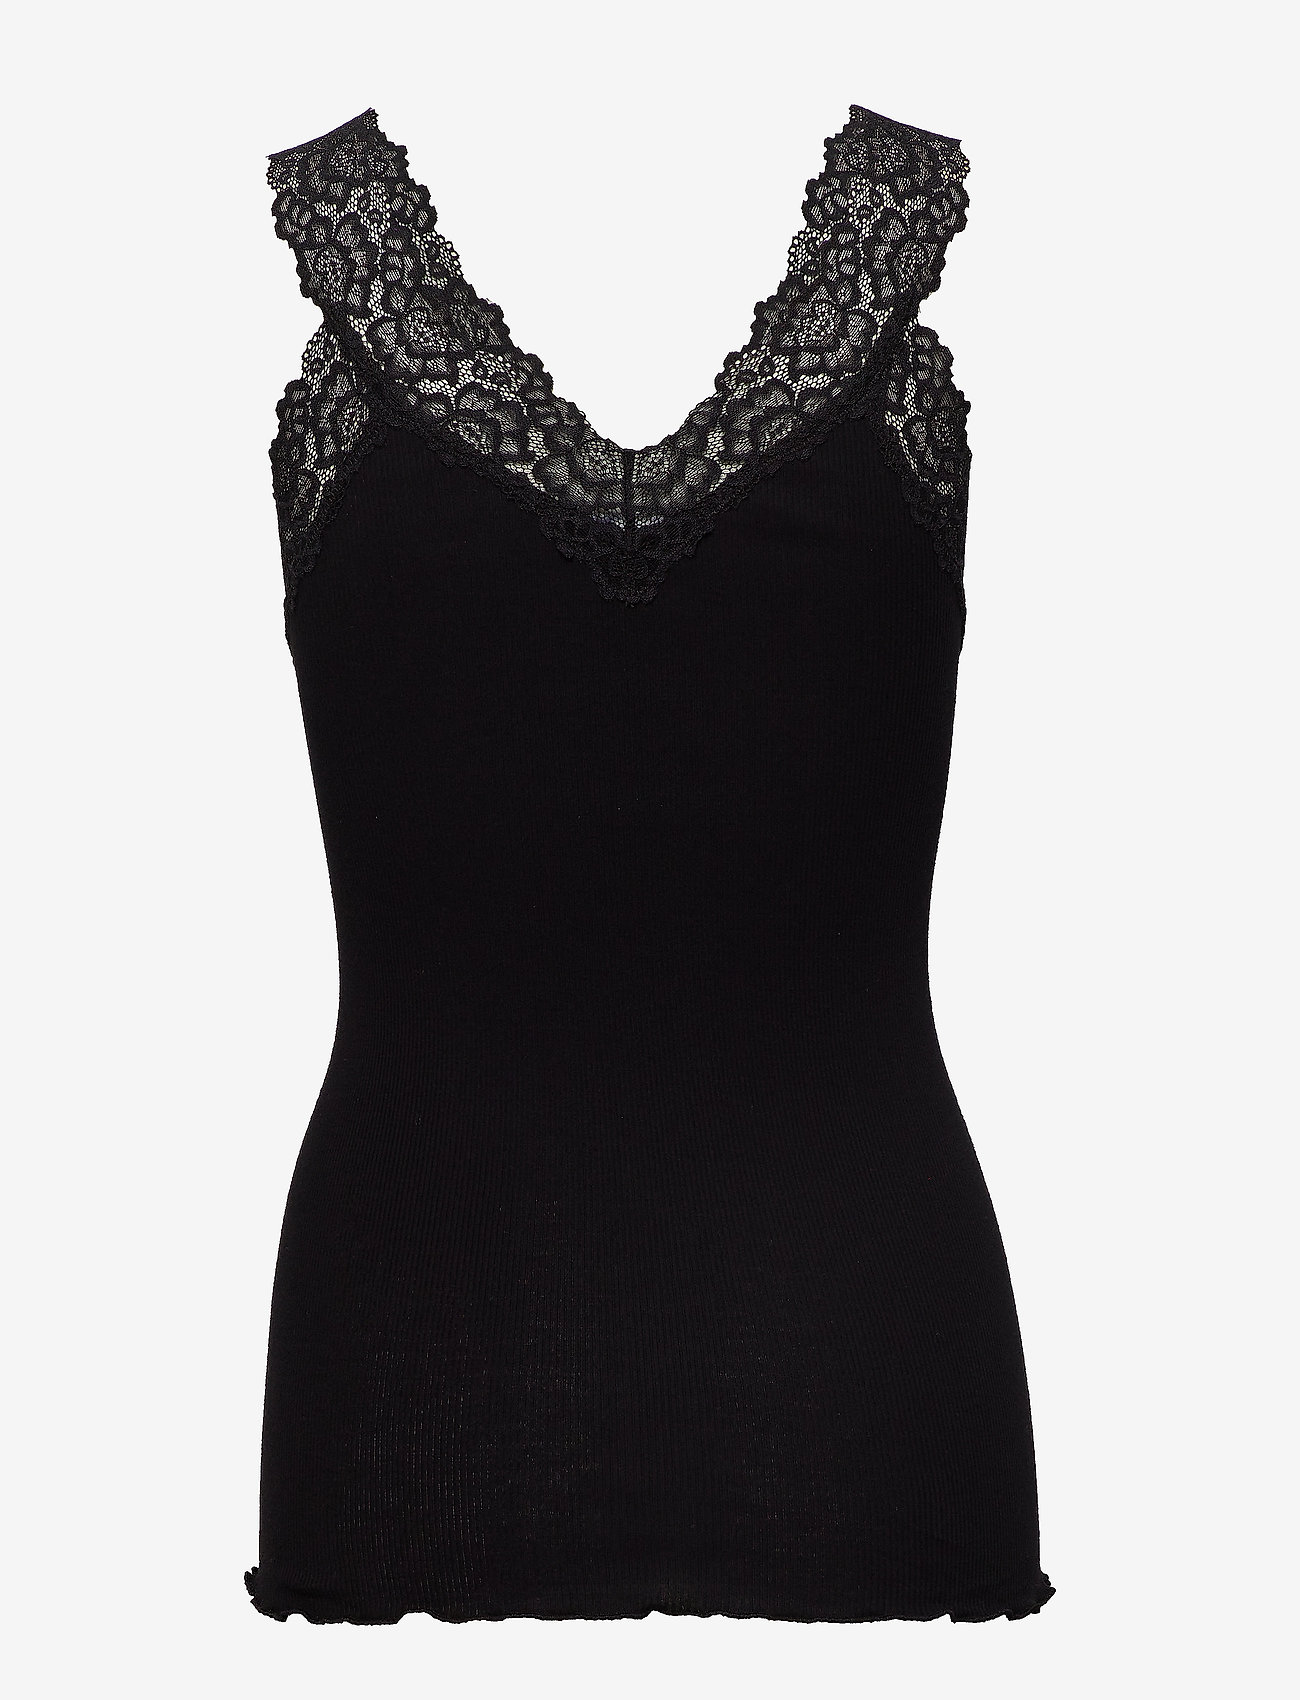 Rosemunde - Organic top w/ lace - lowest prices - black - 1